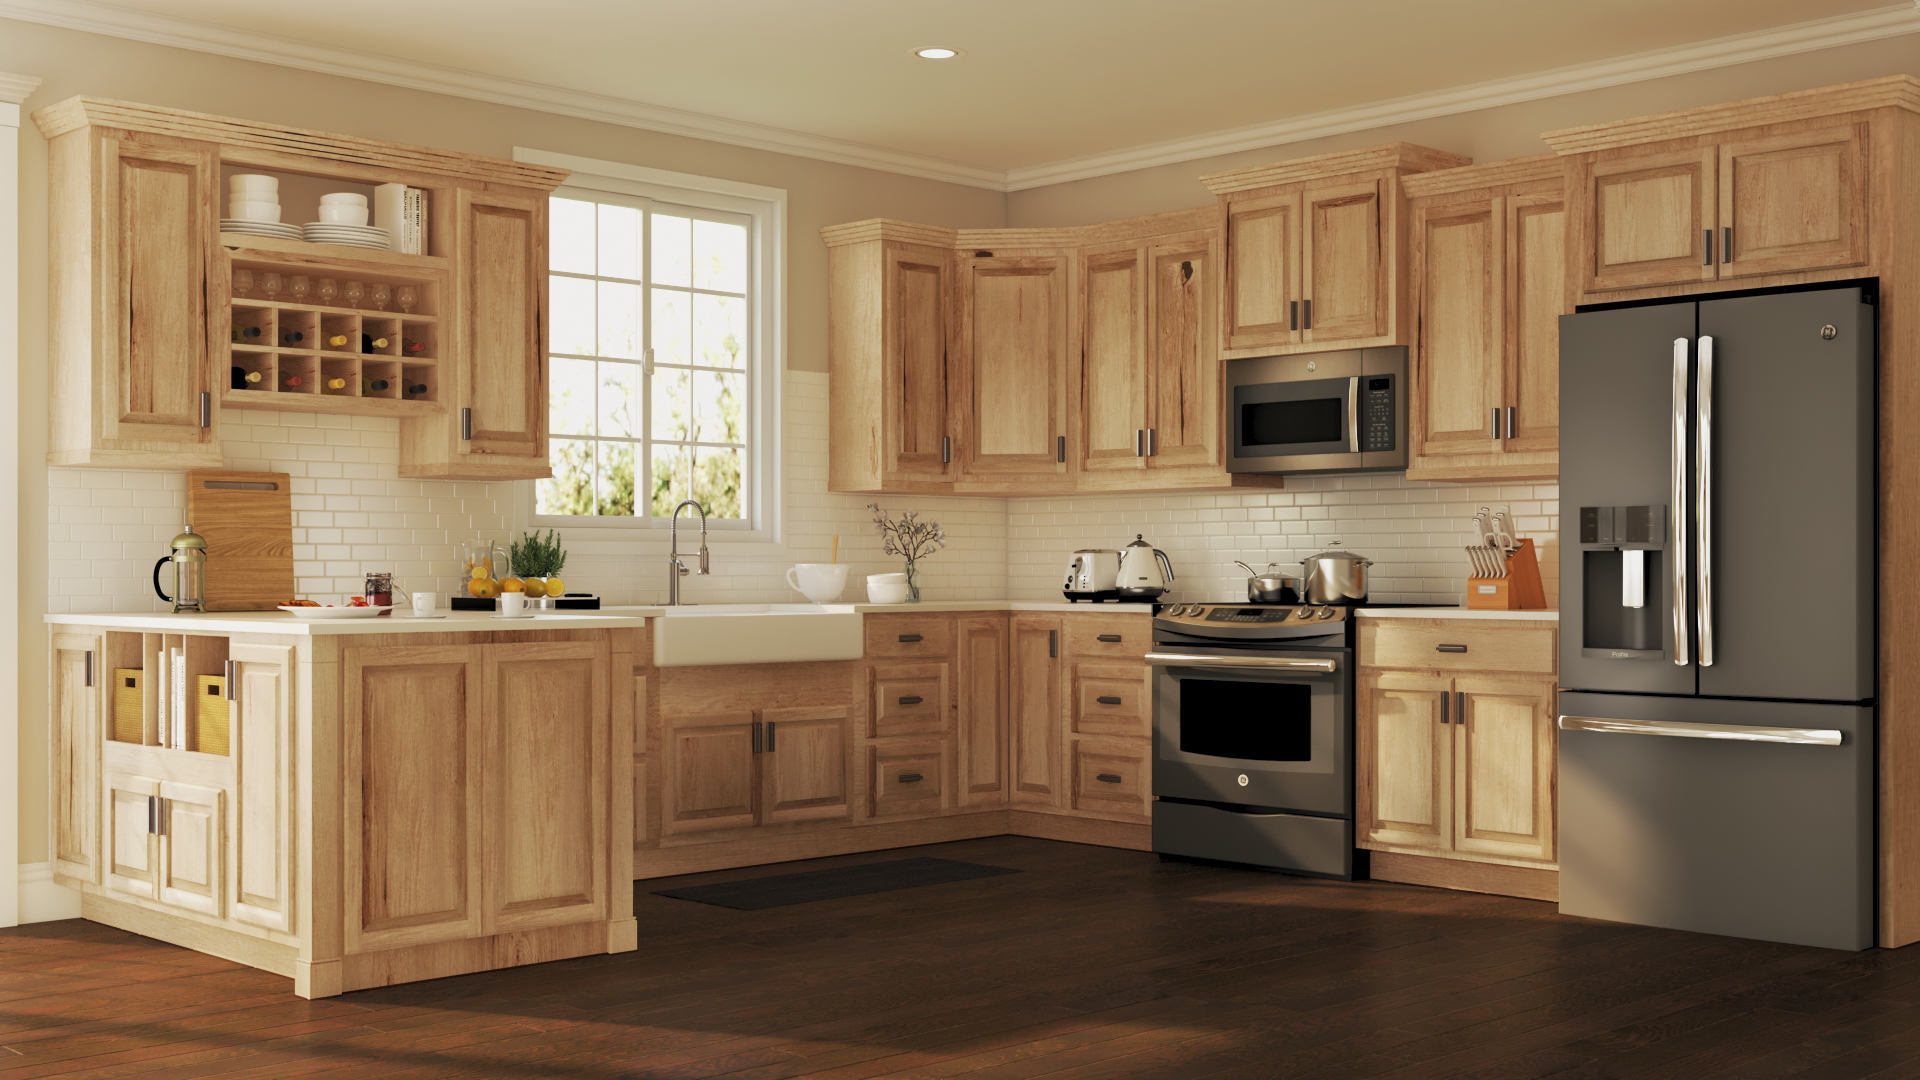 Hampton Bath Cabinets in Natural Hickory - Kitchen - The ...